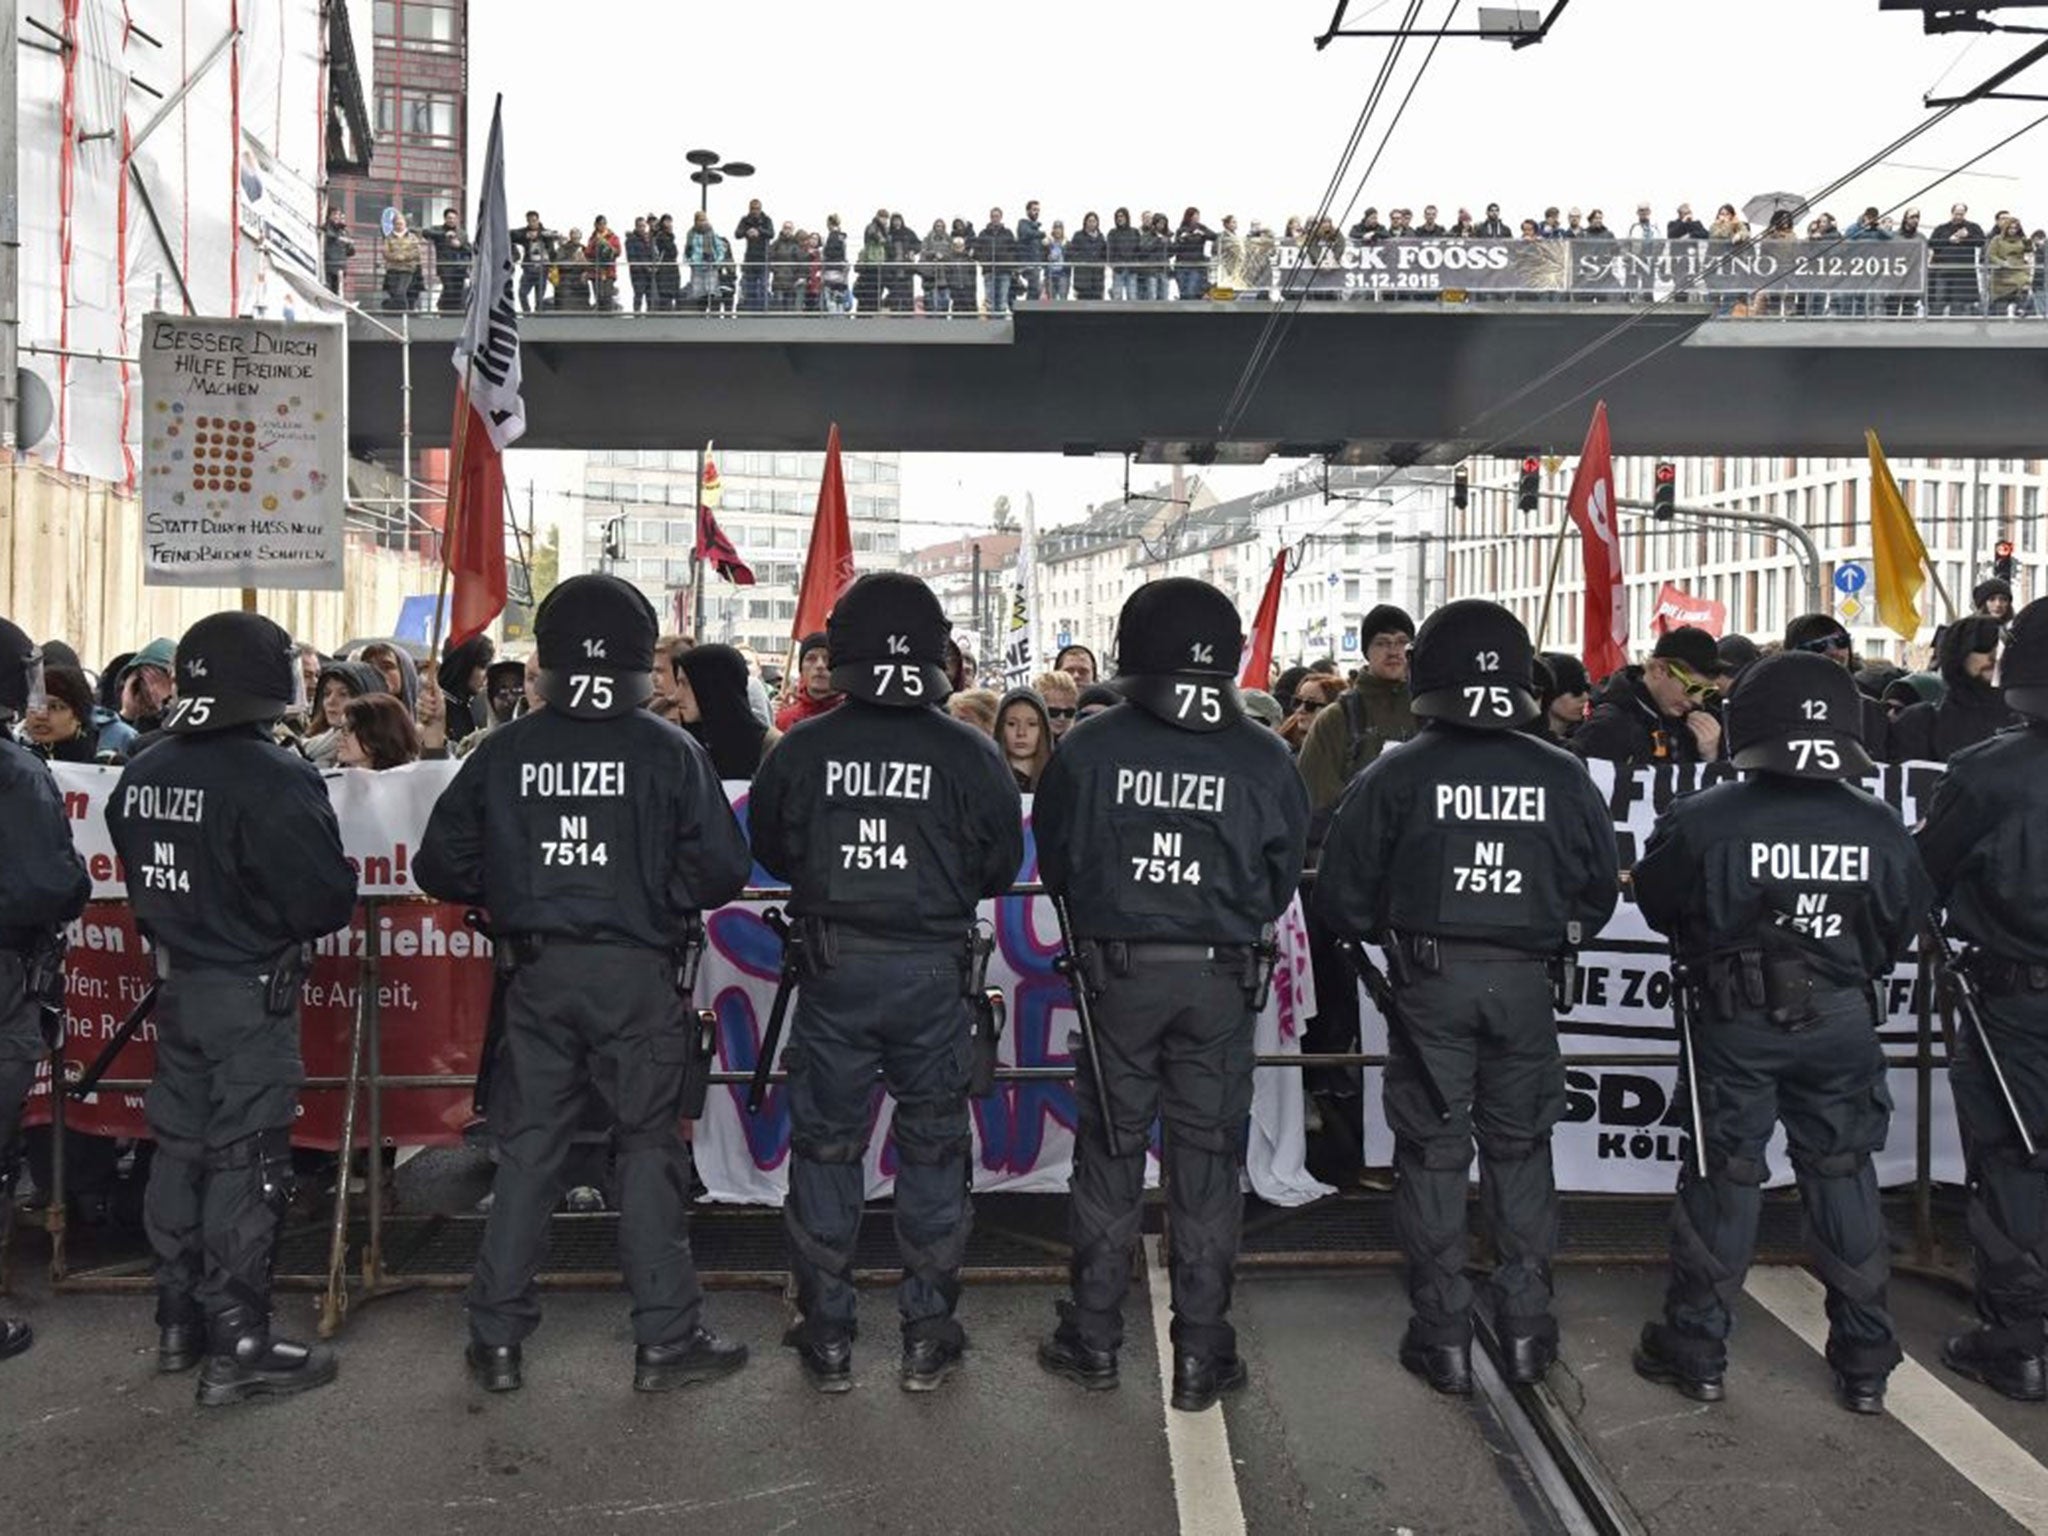 Police secure streets during a counter demonstration against far-right groups in Cologne, Germany, Sunday Oct. 25, 2015. A demonstration, organized by far-right groups and members of Germanyís football hooligan scene, named HOGESA, is observed by 3,500 policemen to secure the demonstration and counter protests in the city.